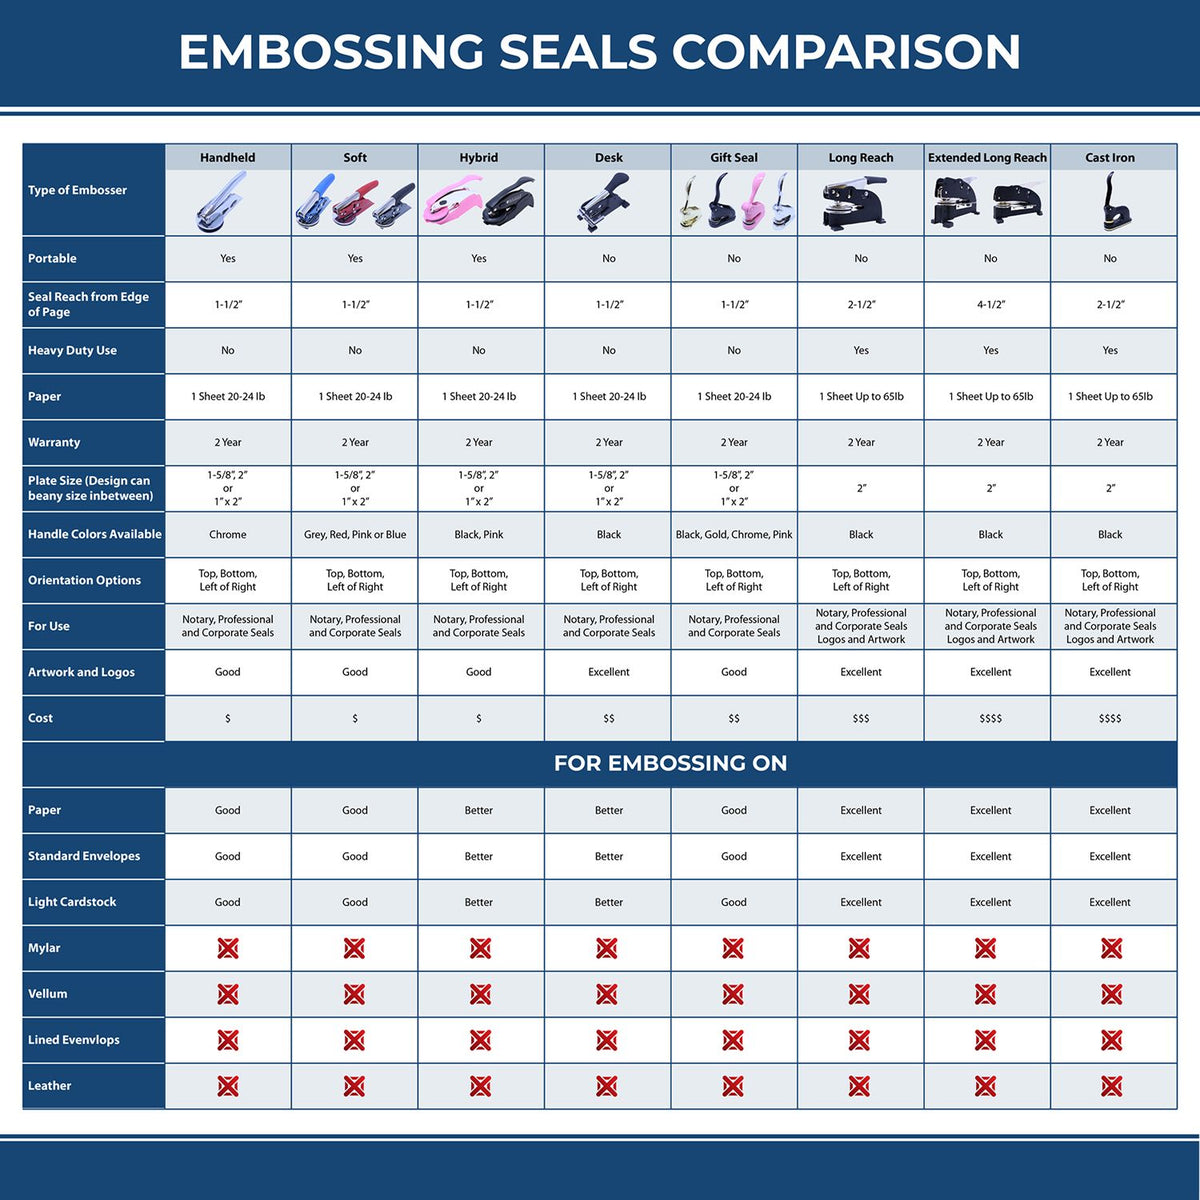 A comparison chart for the different types of mount models available for the Soft New Jersey Professional Geologist Seal